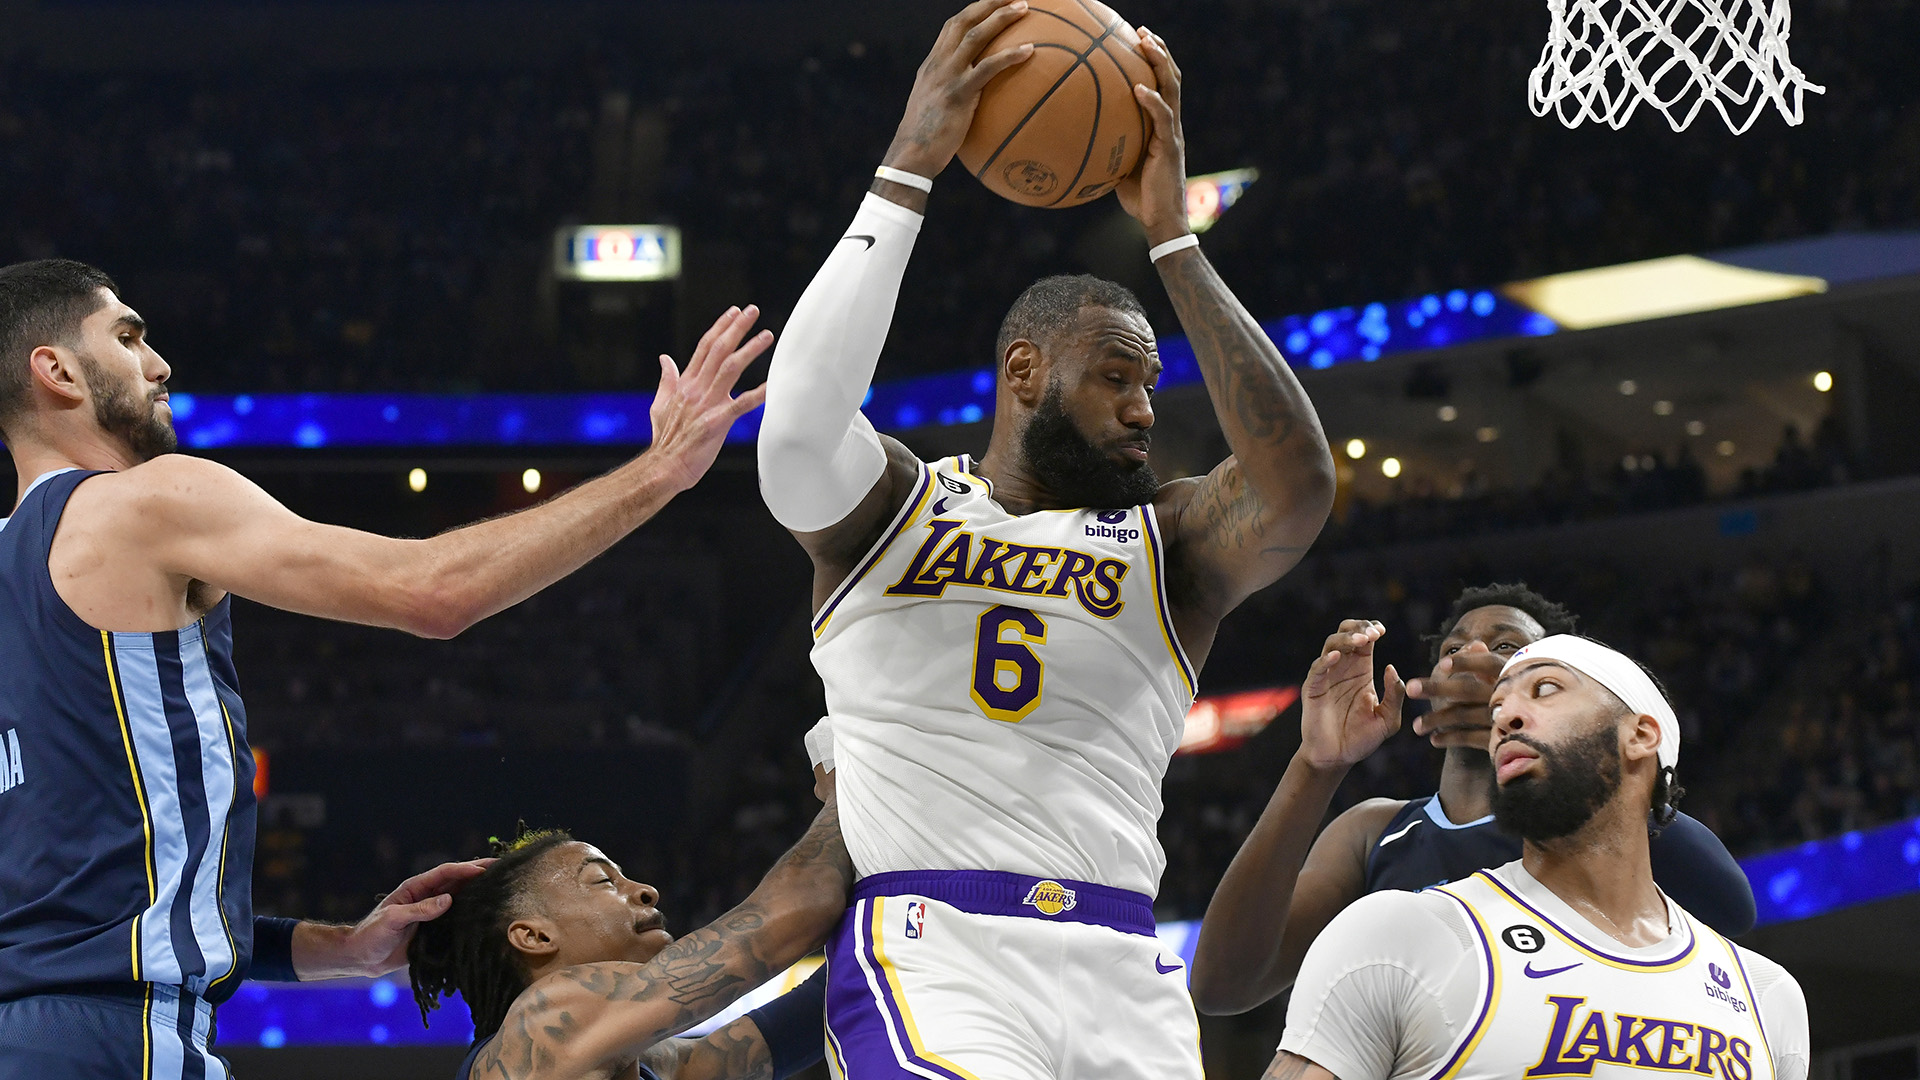 Spectrum SportsNet  Lakers, Galaxy, Sparks, Chargers - Live & On